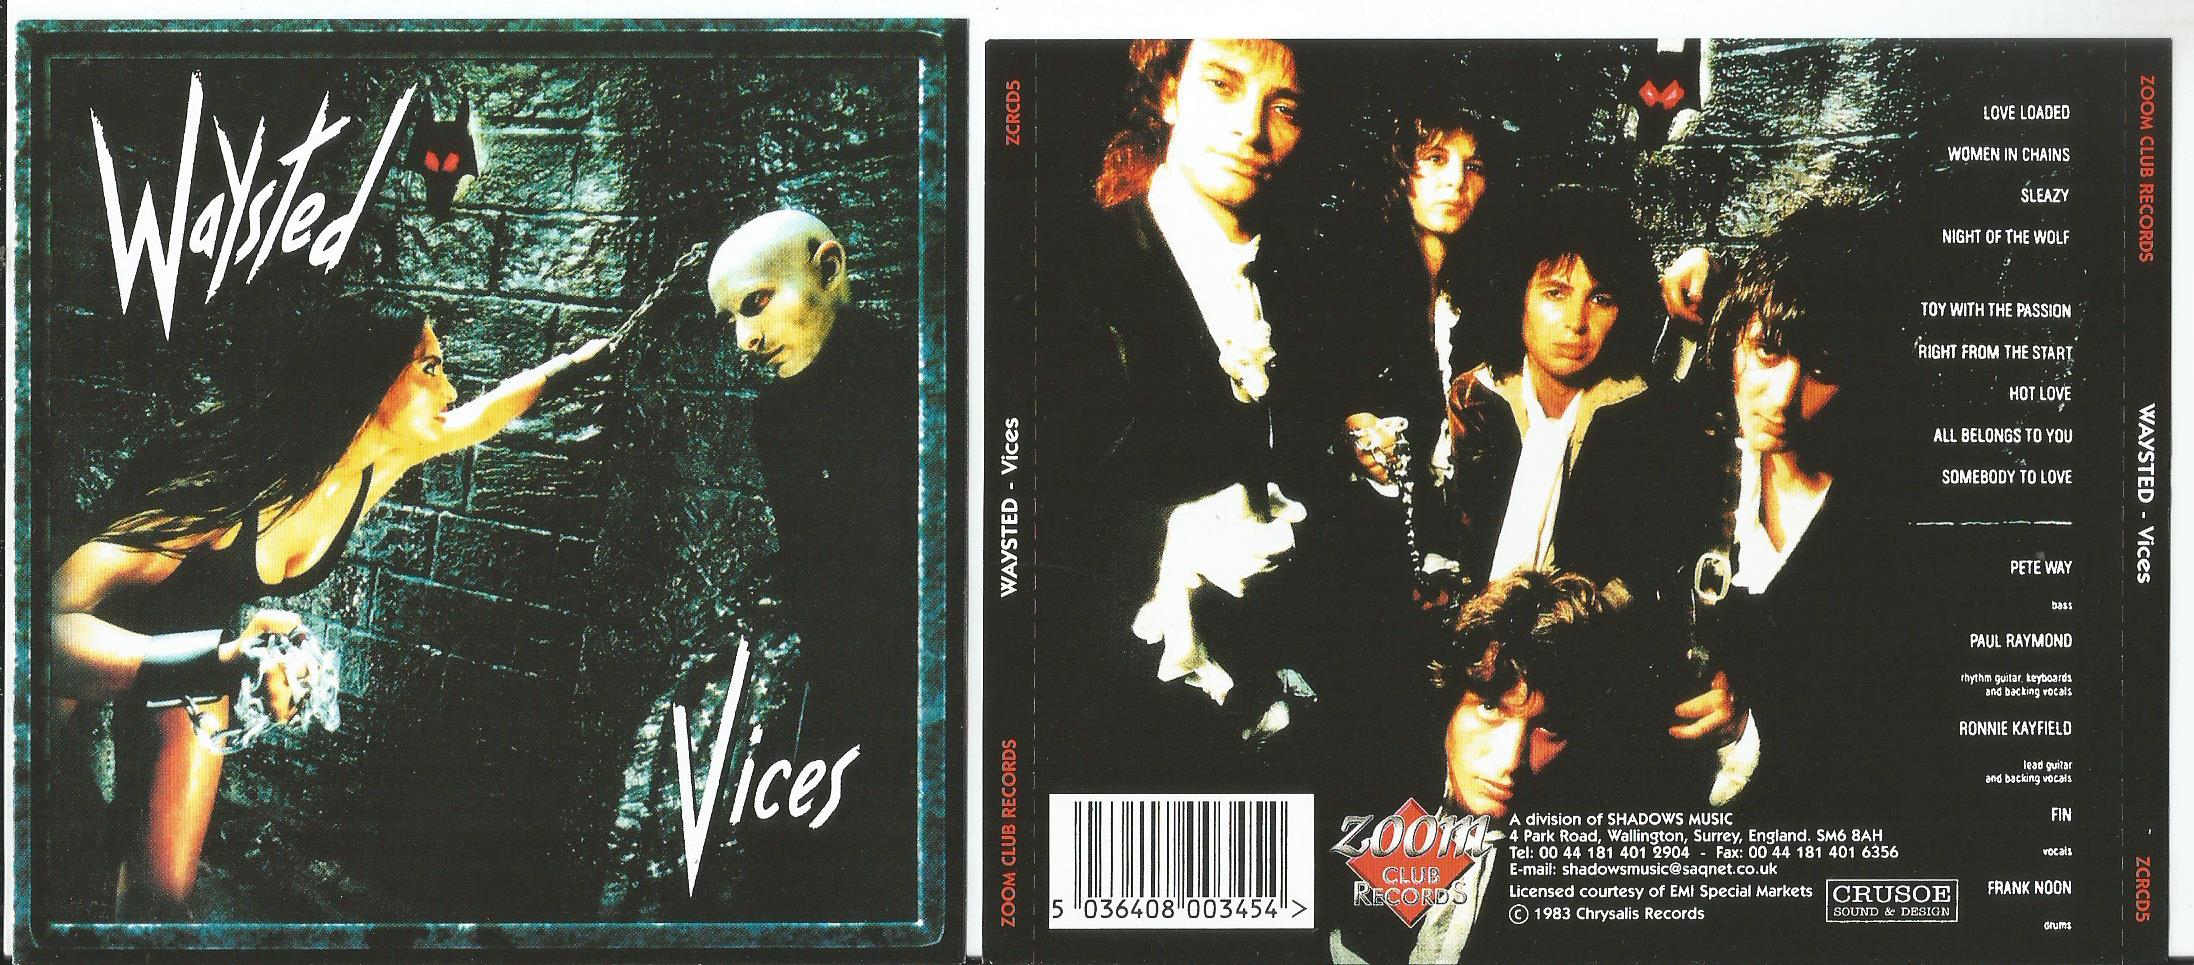 Load love. WAYSTED vices 1983. Vices Deluxe Edition WAYSTED. WAYSTED save your Prayers 1986. WAYSTED - 2004 back from the Dead.